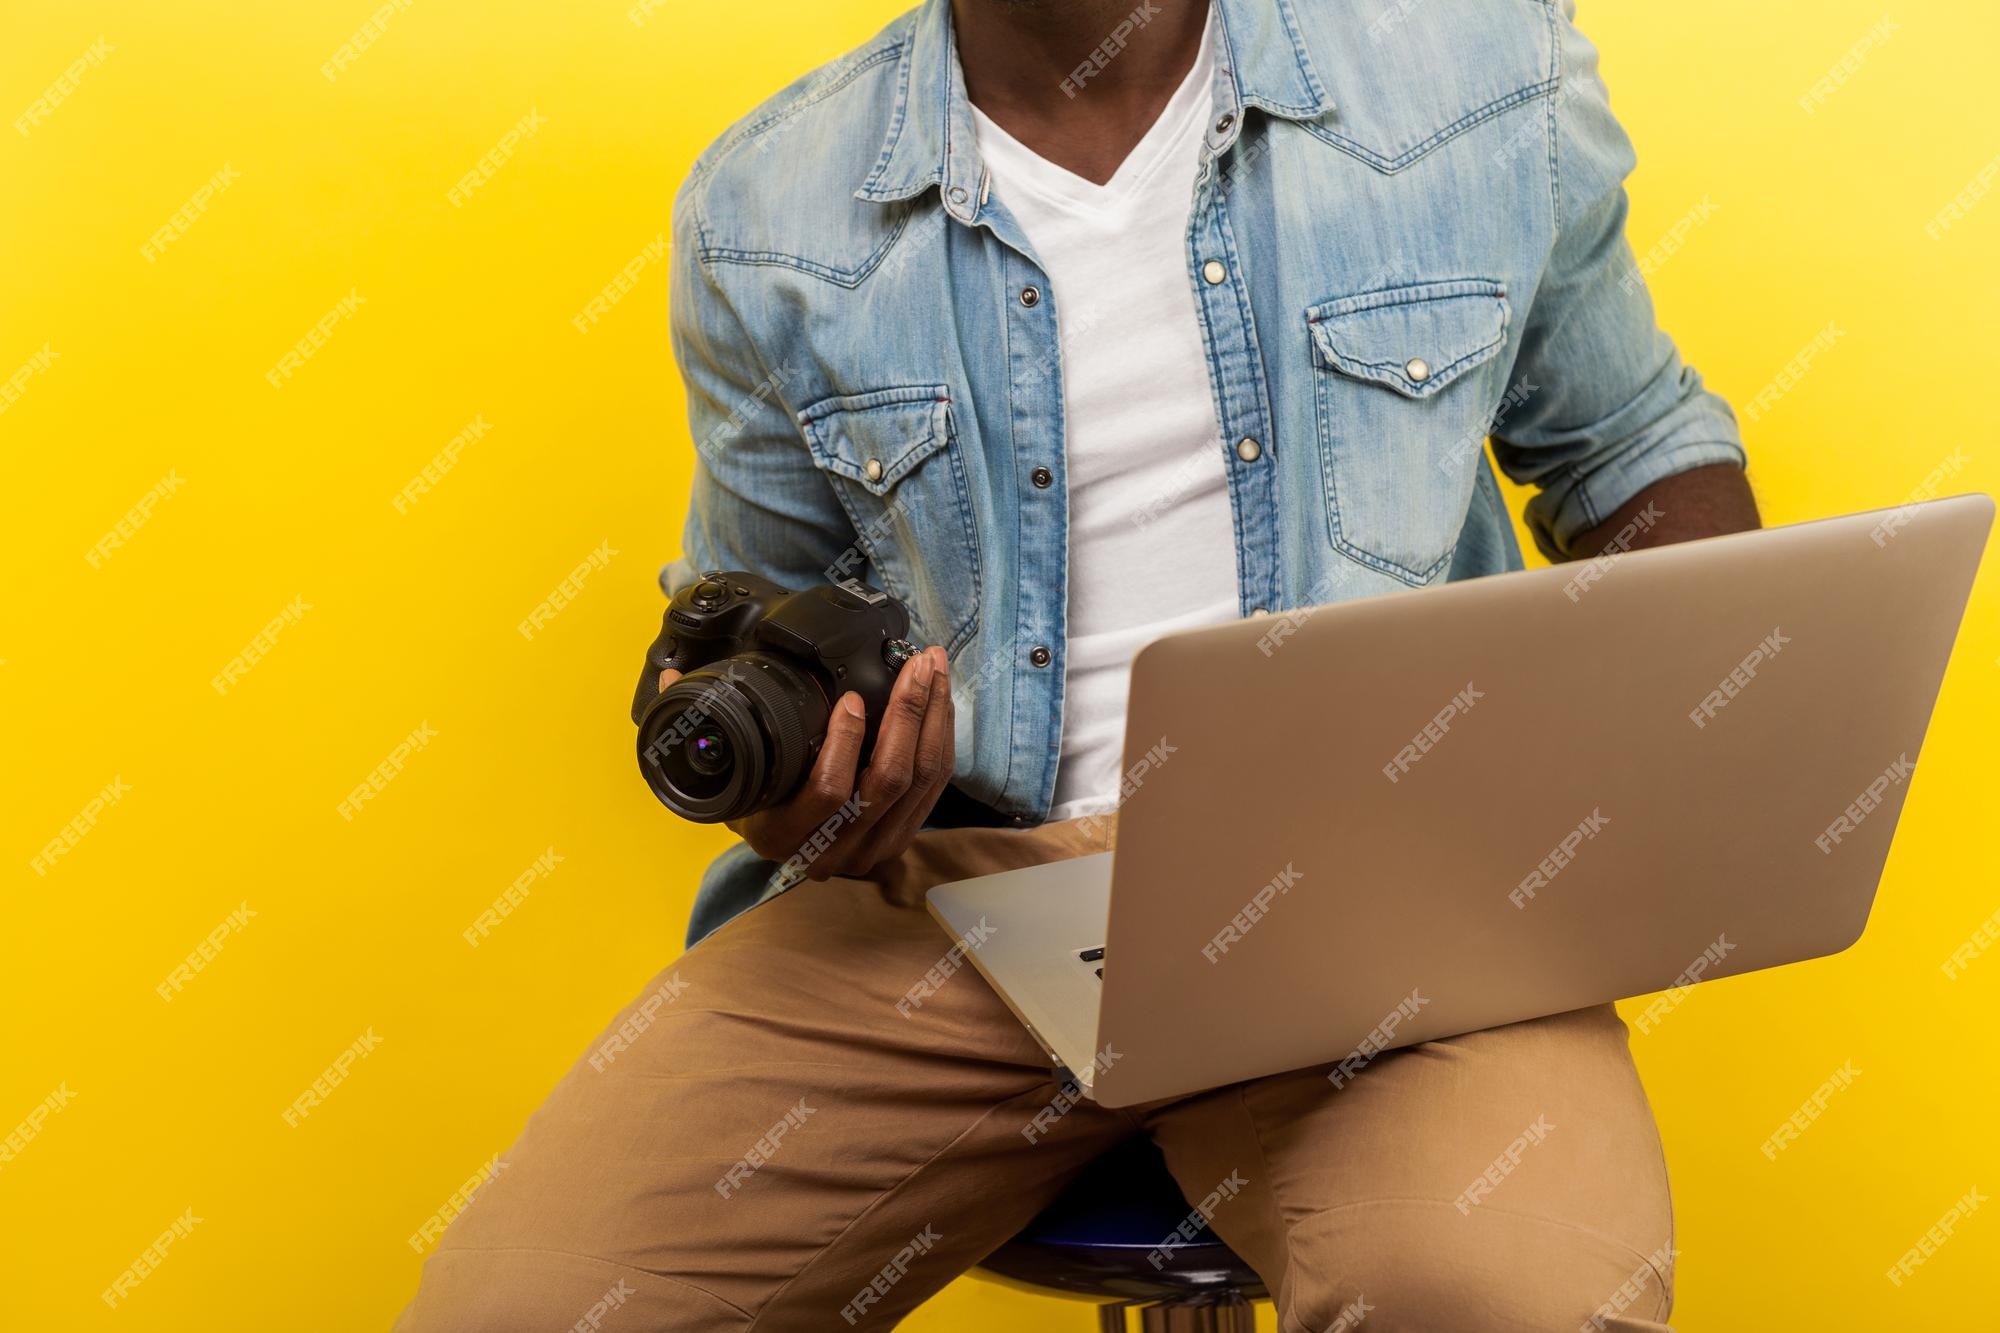 Premium Photo | Cropped portrait of male photographer in denim shirt  holding digital dslr camera and laptop, going to take picture or create  video, using photo editing apps. studio shot isolated on